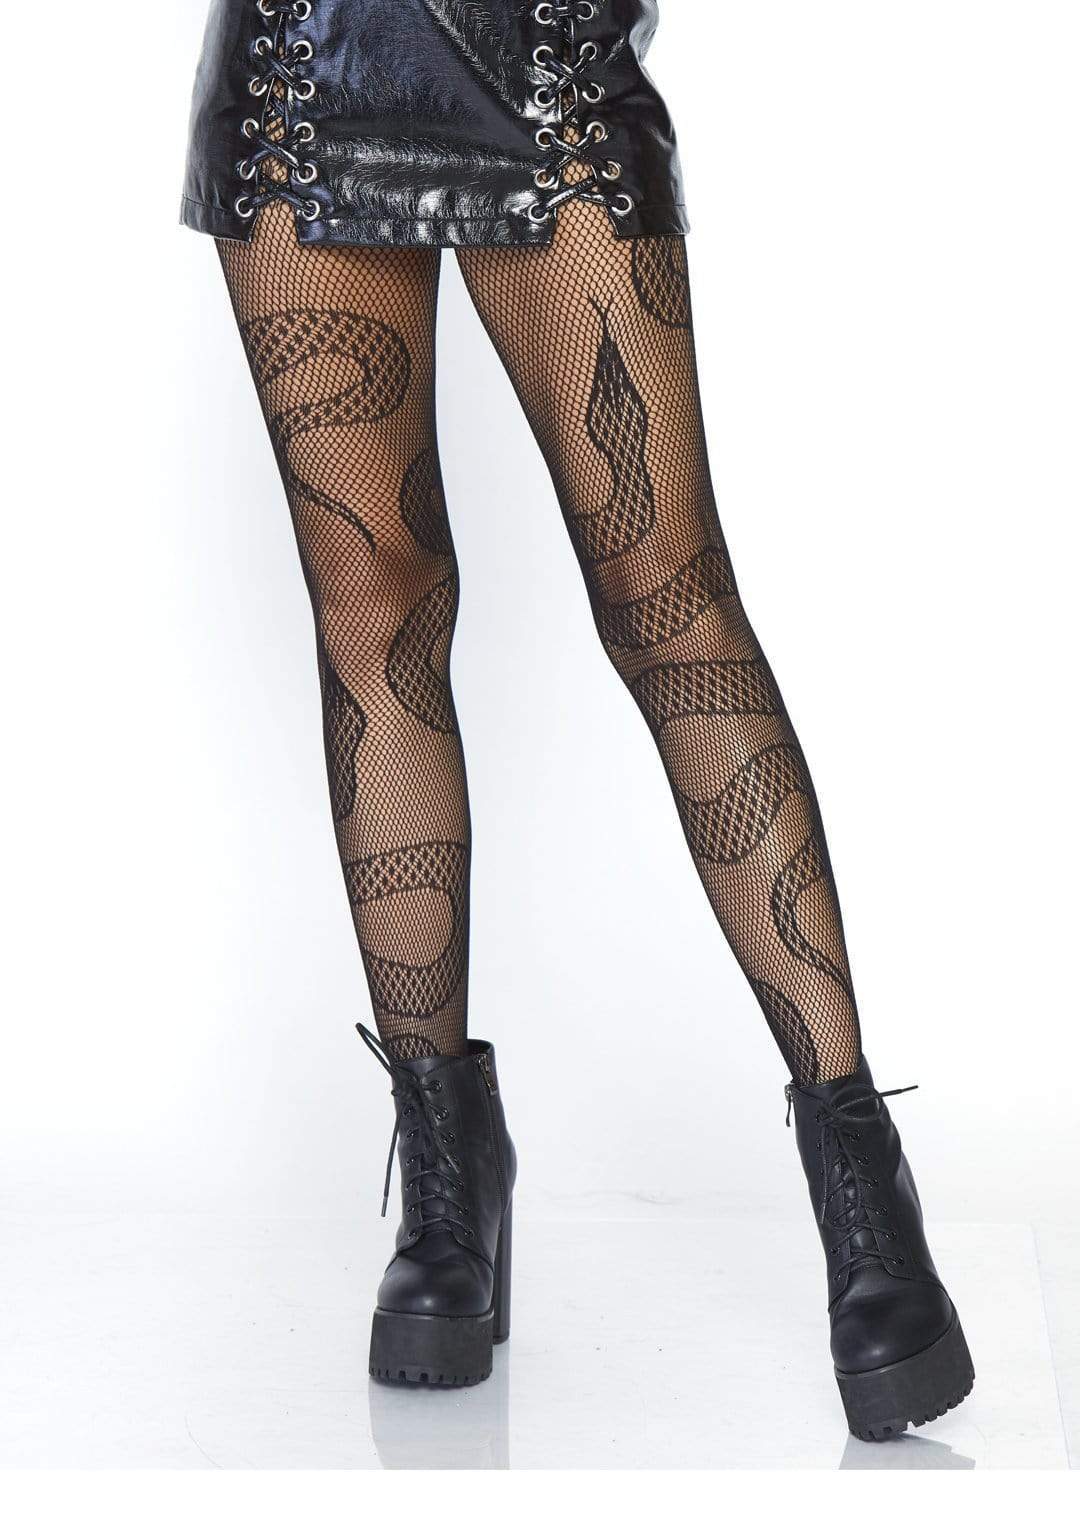 New Release Footless Cutout Fishnet Tights At AvInk!